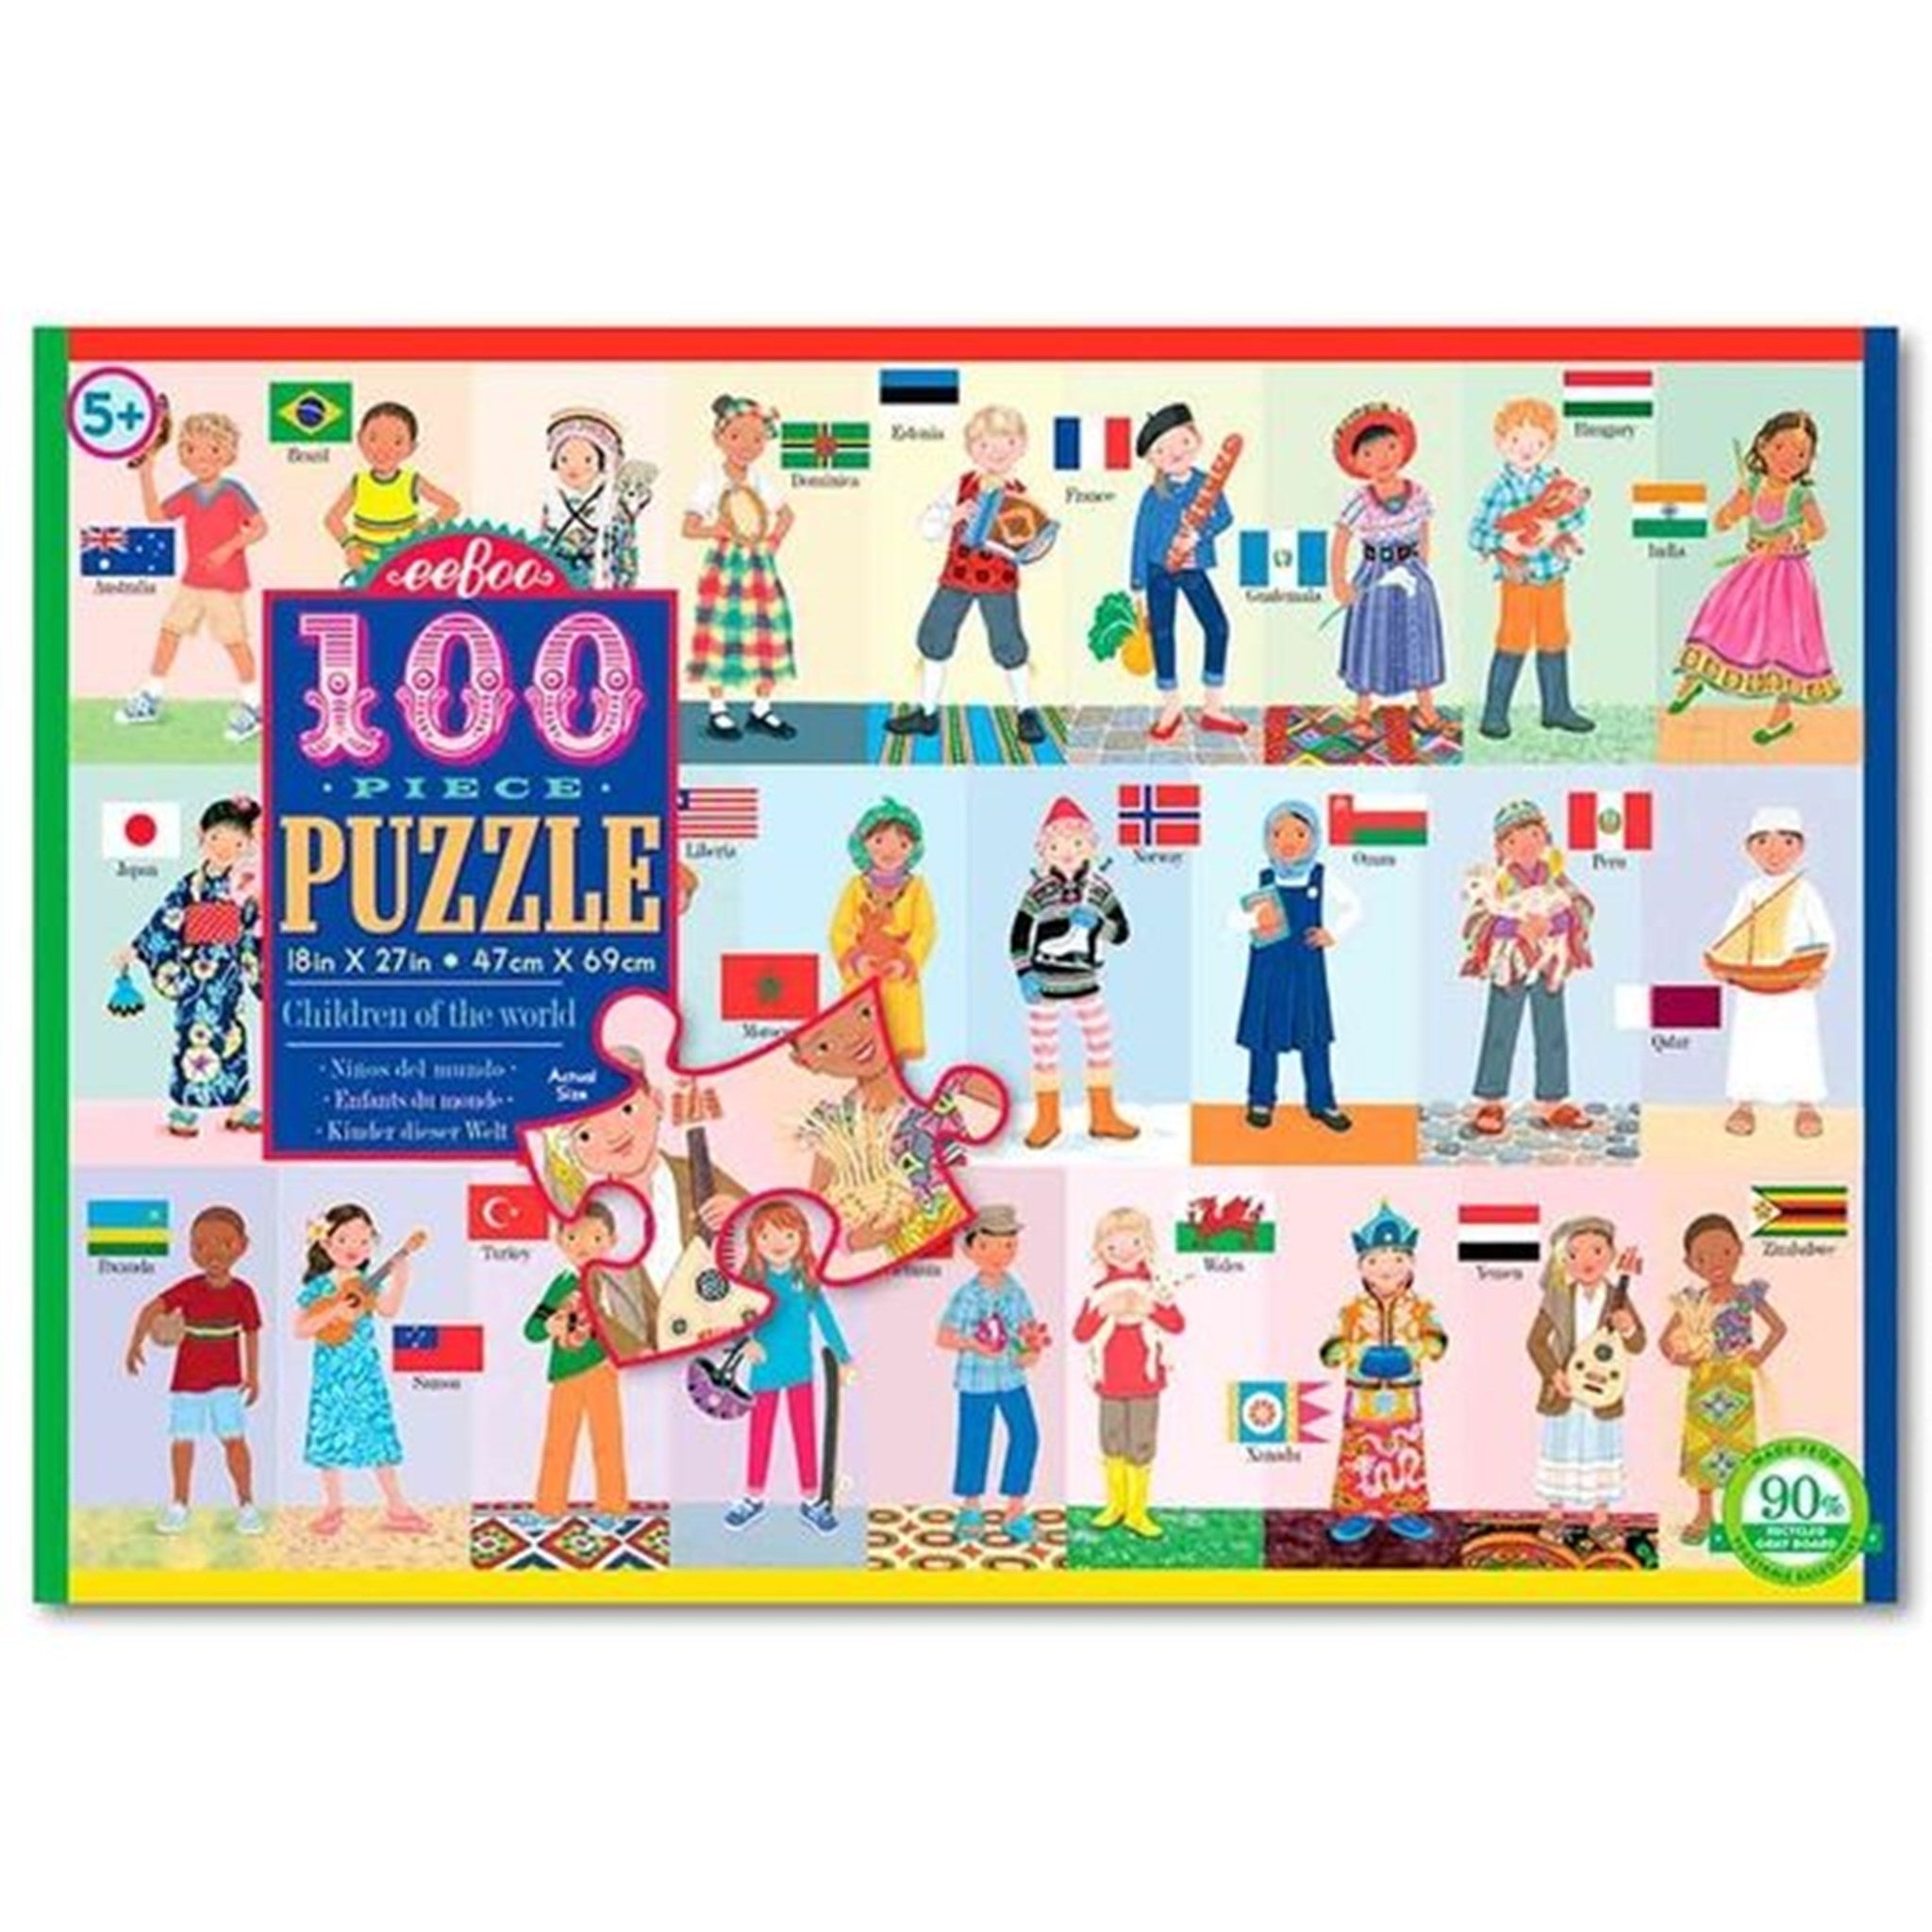 Eeboo Puzzle 100 Pieces - Children of the World